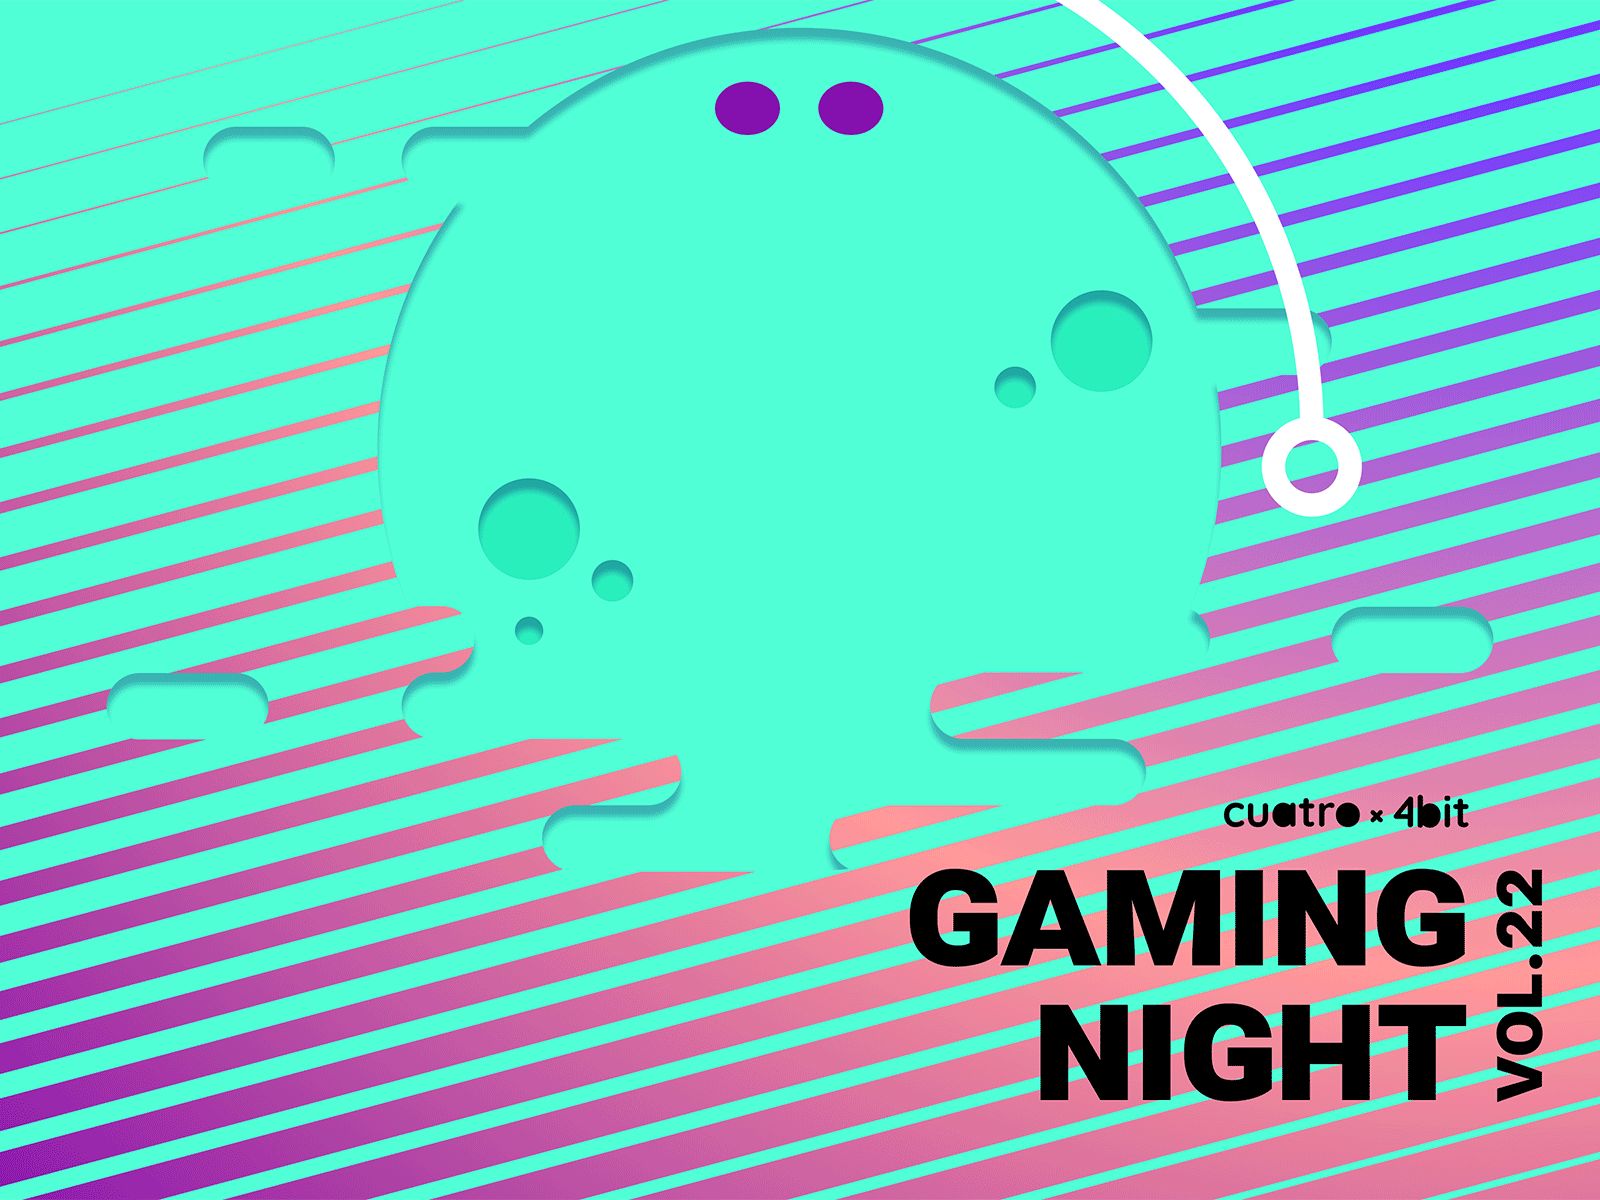 4x4bit Gaming Night Podcast vol.22 2d cover artwork editorial illustration figma geometric geometry graphicdesign illustration paper cut podcast cover poster posterdesign shapes vector art